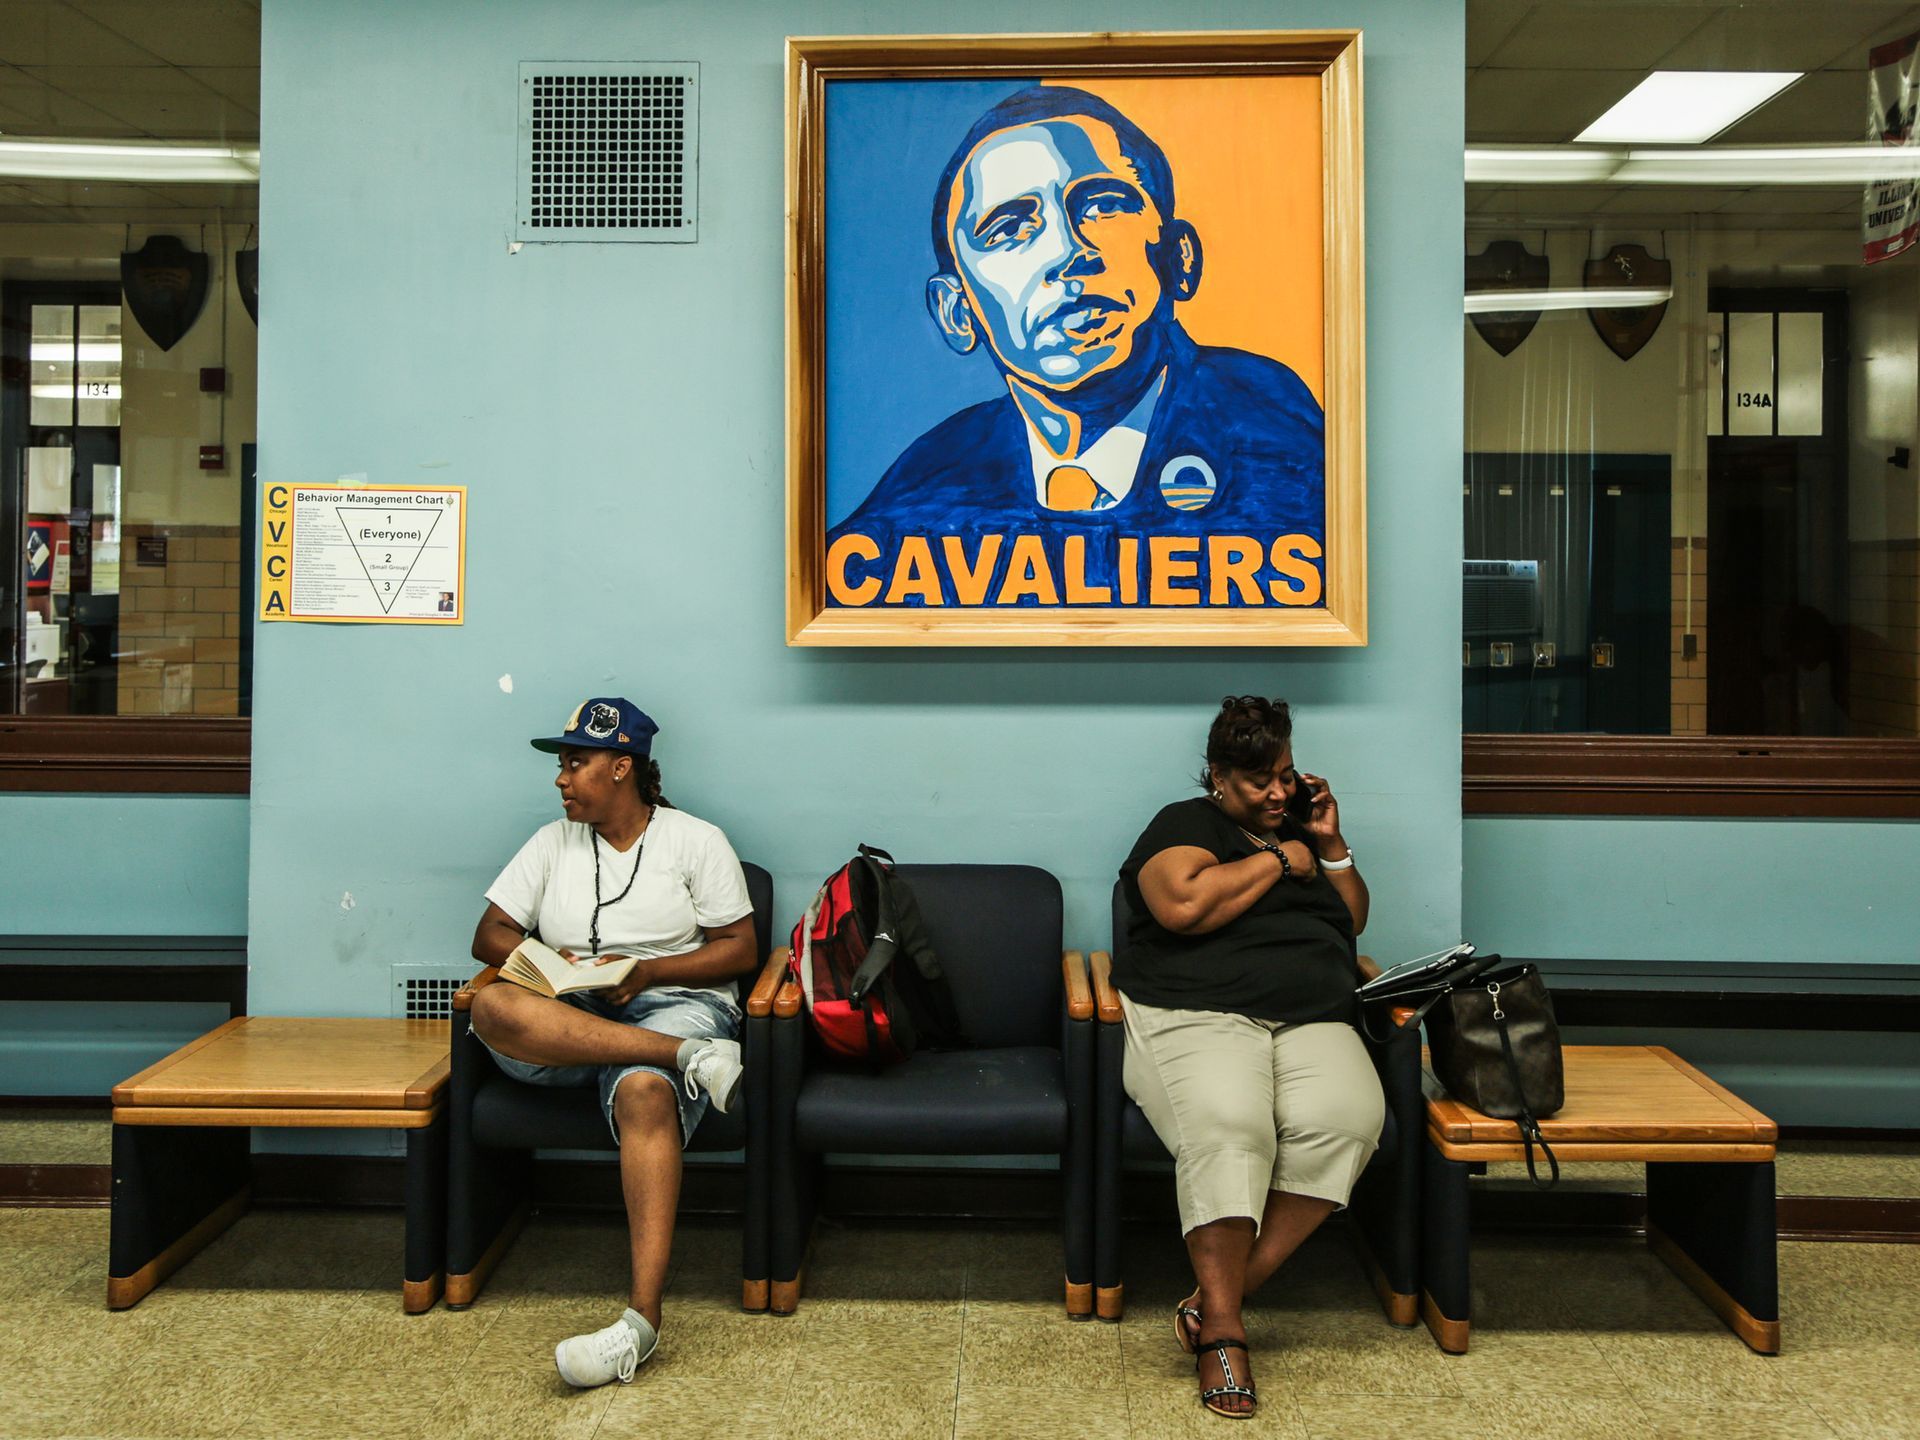 Two people sitting in chairs underneath a portrait of Obama in blue and yellow with the word Cavaliers